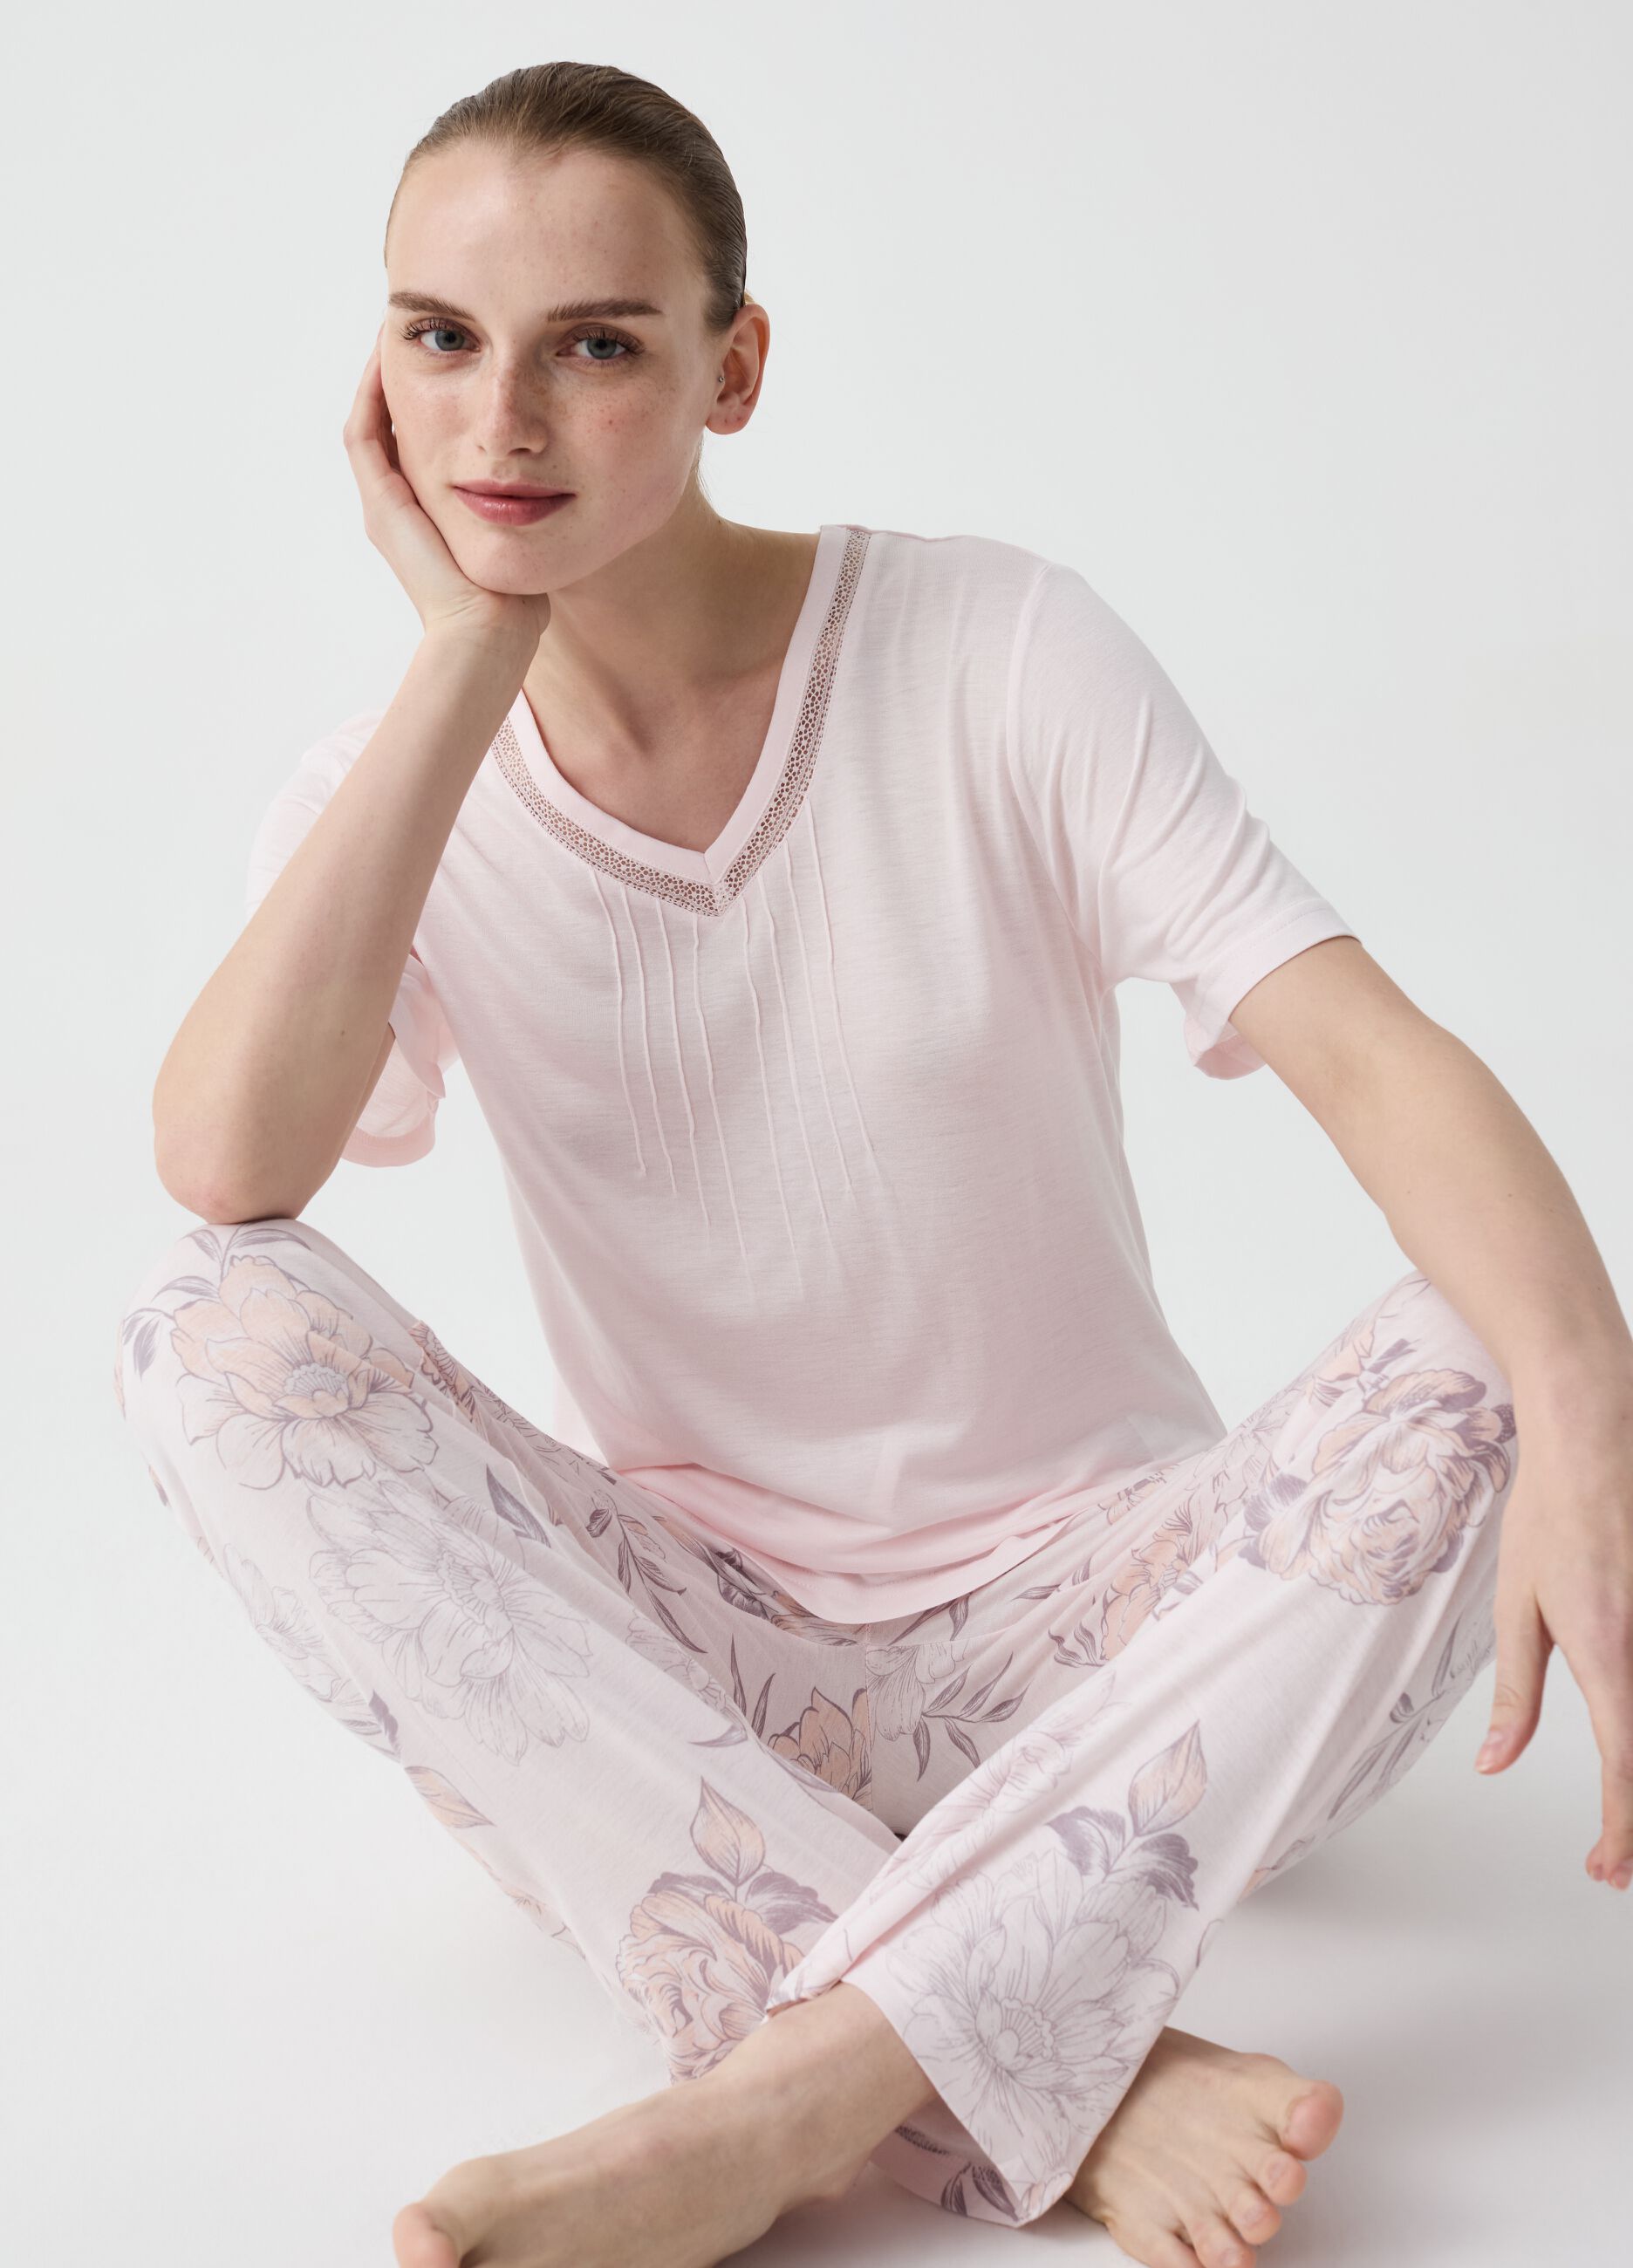 Full-length pyjamas with floral pattern